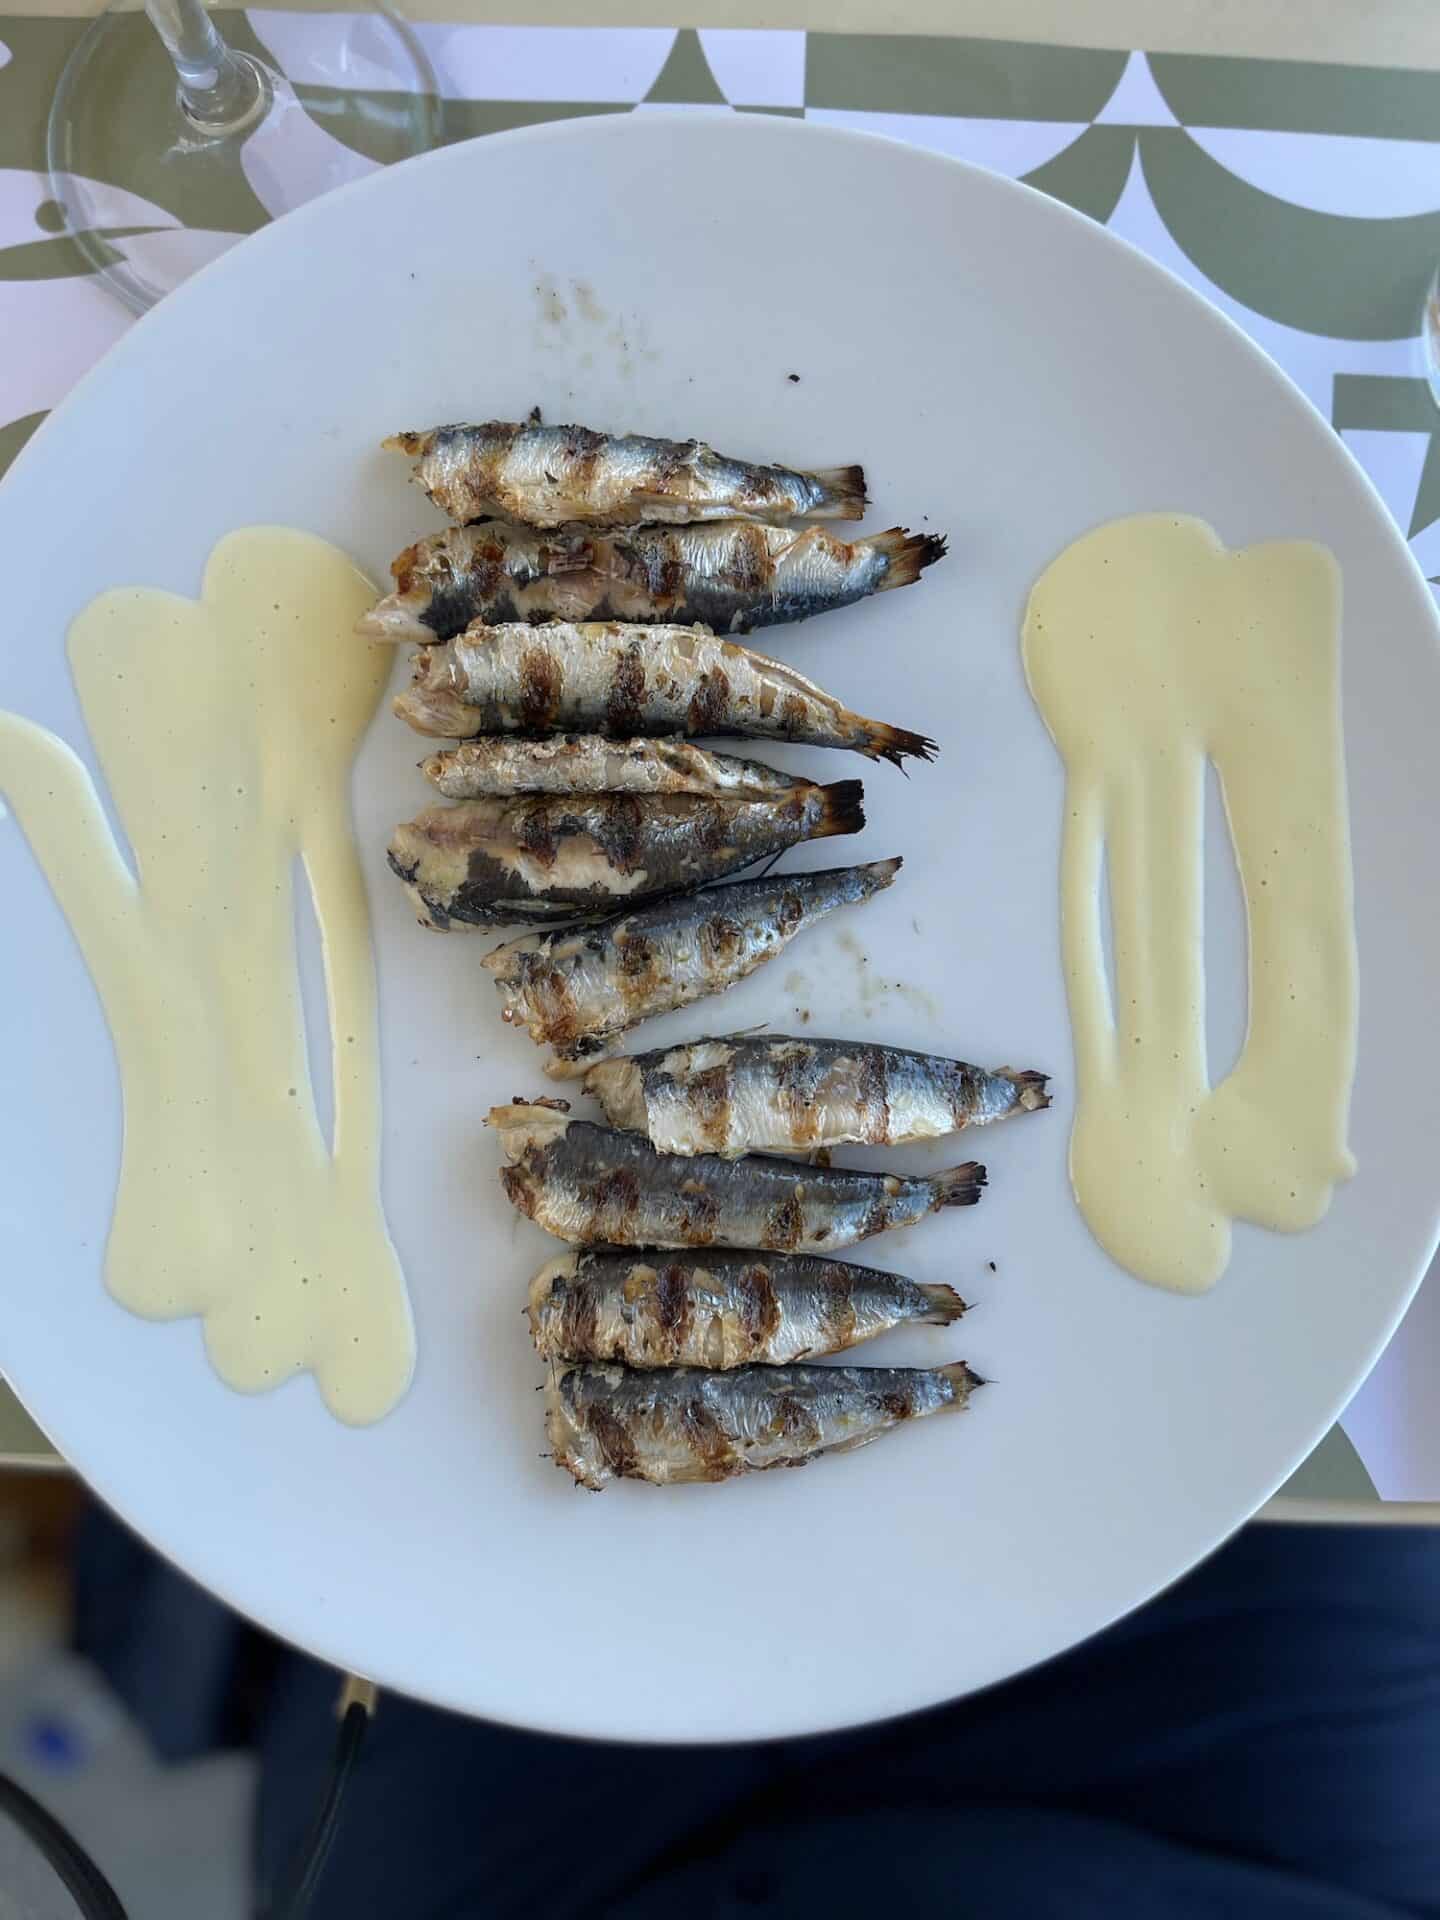 Grilled sardines served on a white plate with a drizzle of yellow sauce on the side, a traditional dish in Milos.